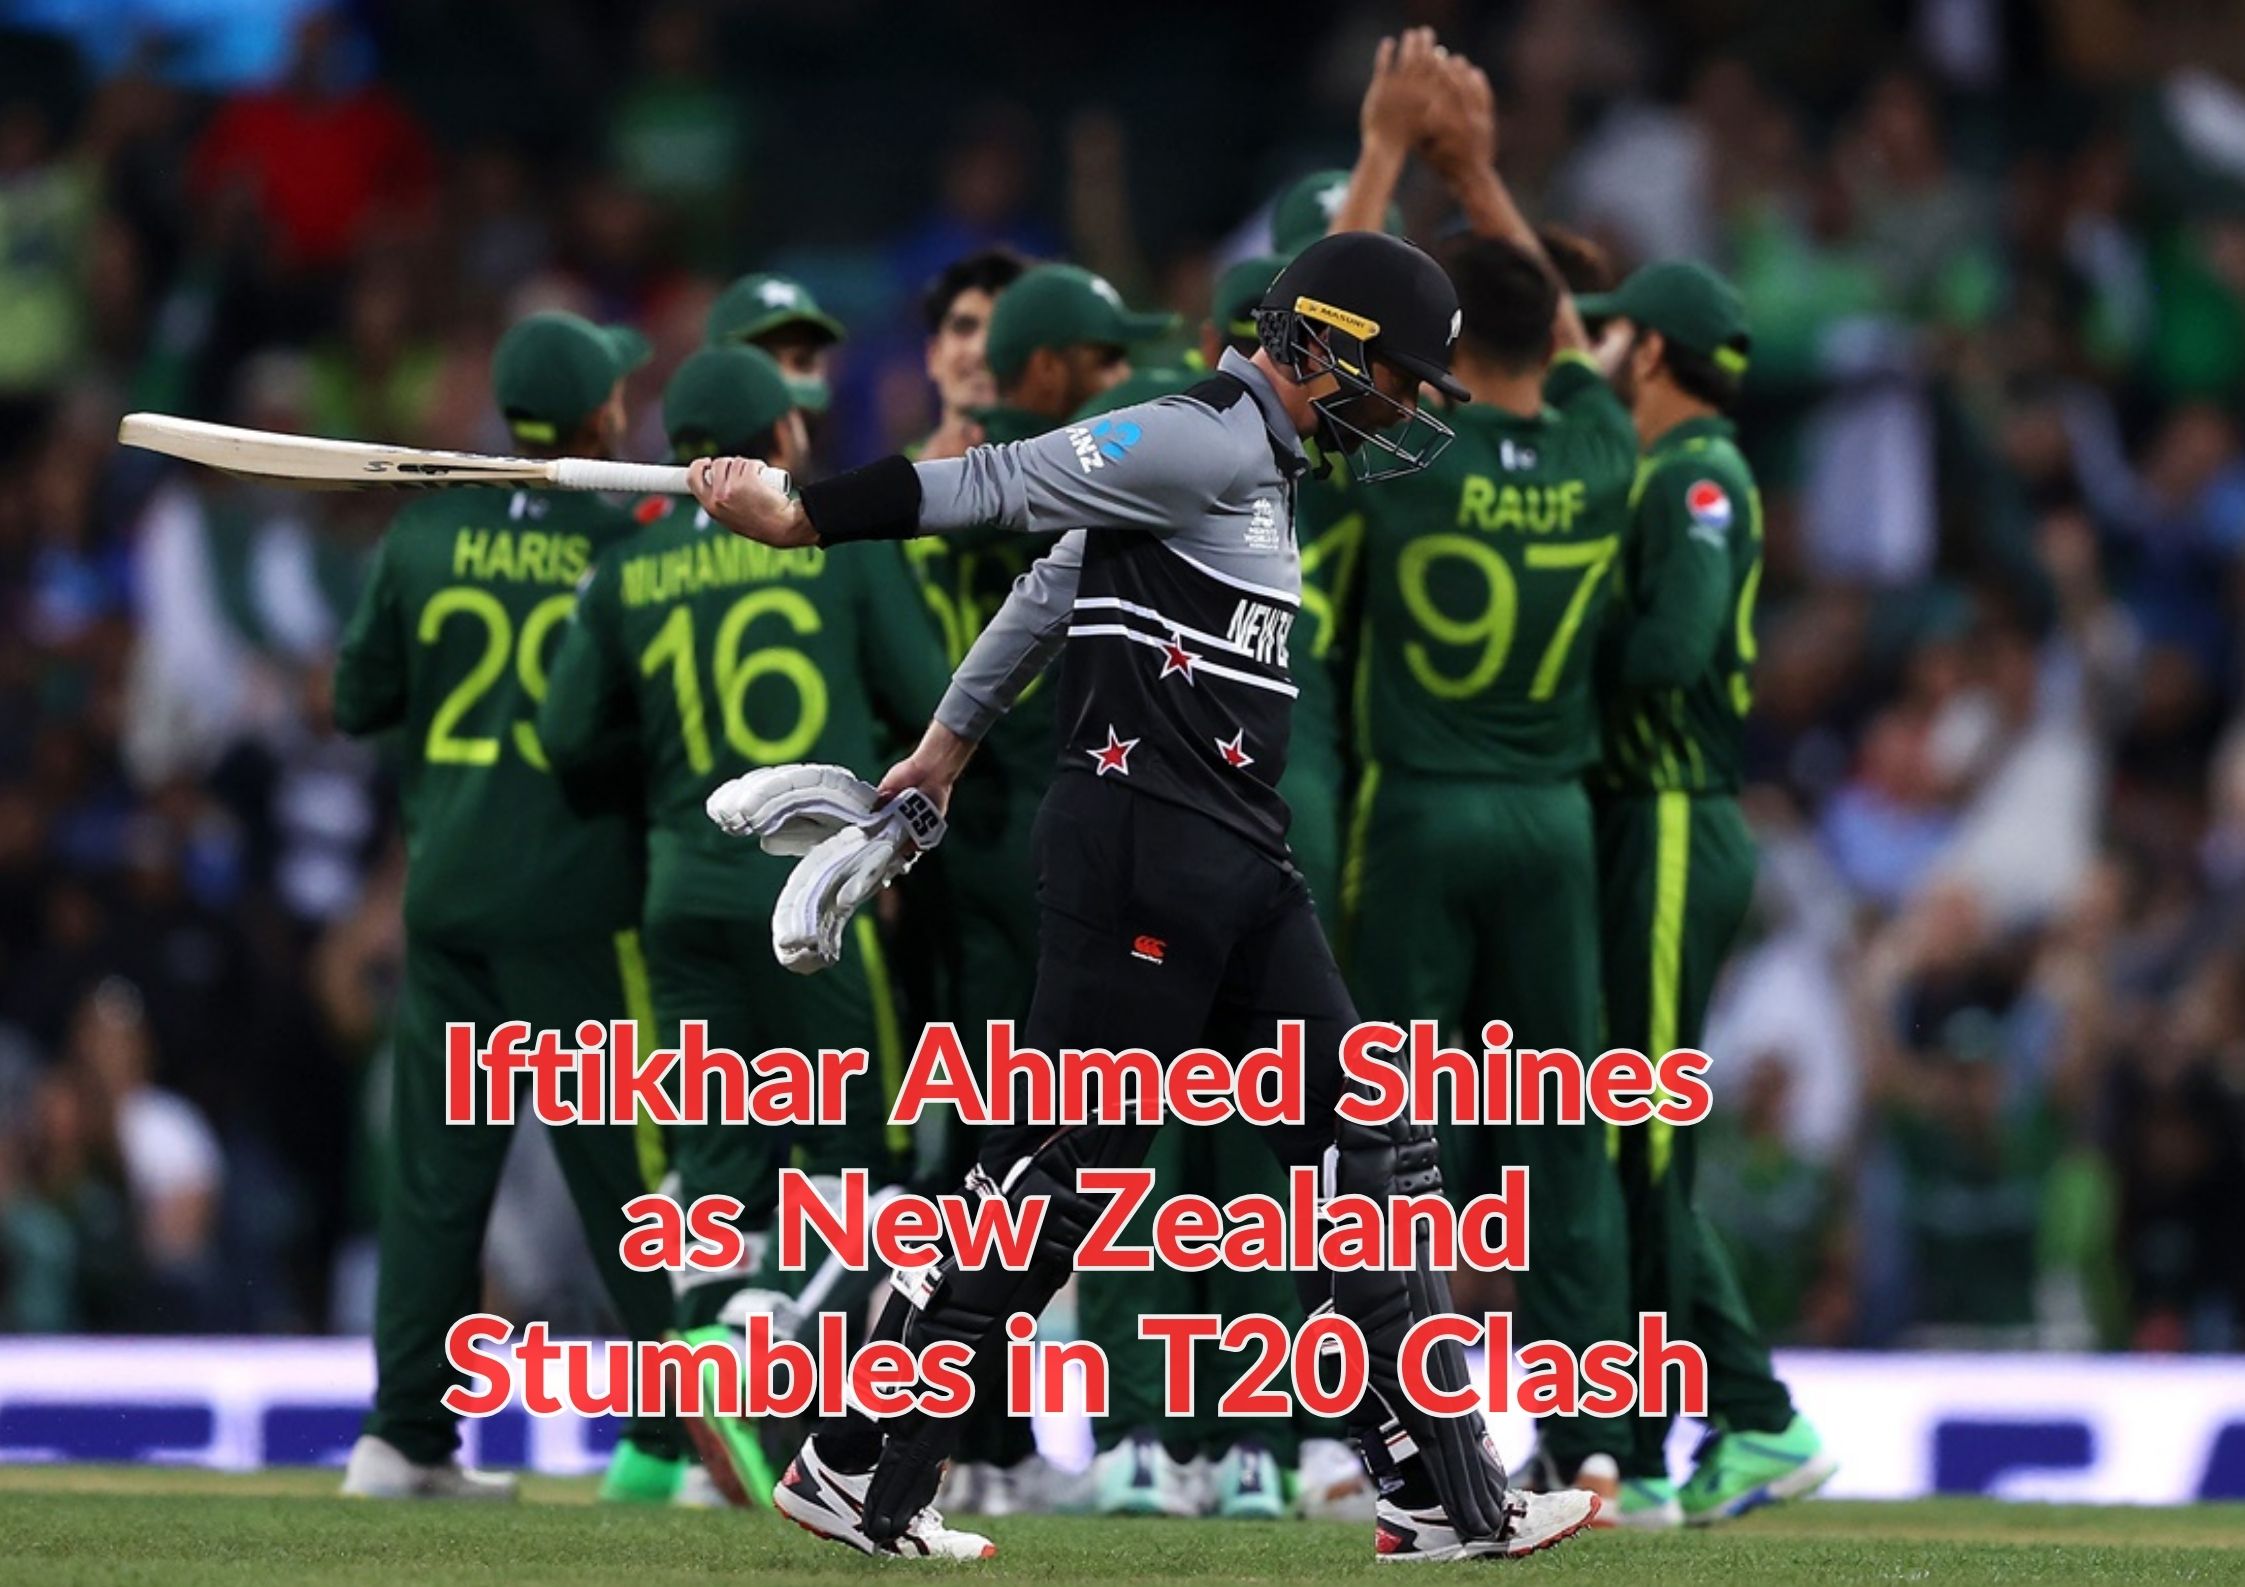 Pakistan's Remarkable Turnaround: Iftikhar Ahmed Shines as New Zealand Stumbles in T20 Clash